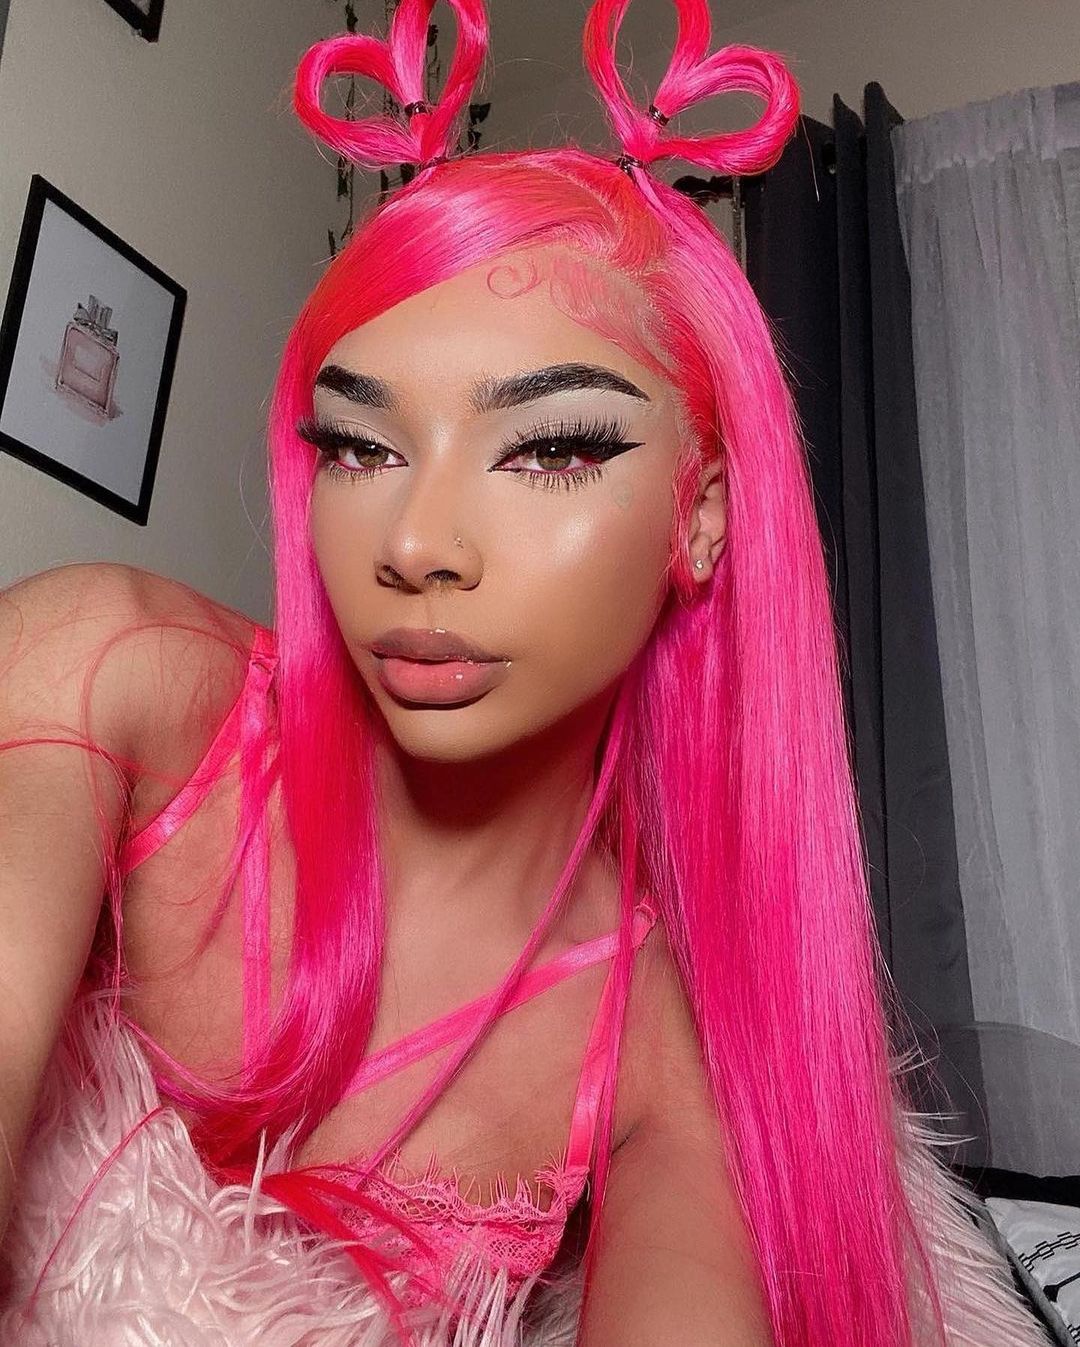 Hot Pink Bob Wig Human Hair HD Lace Front Wigs Short Bob Lace Frontal Wigs for Black Women Pre Plucked Glueless Wig----Geeta Hair